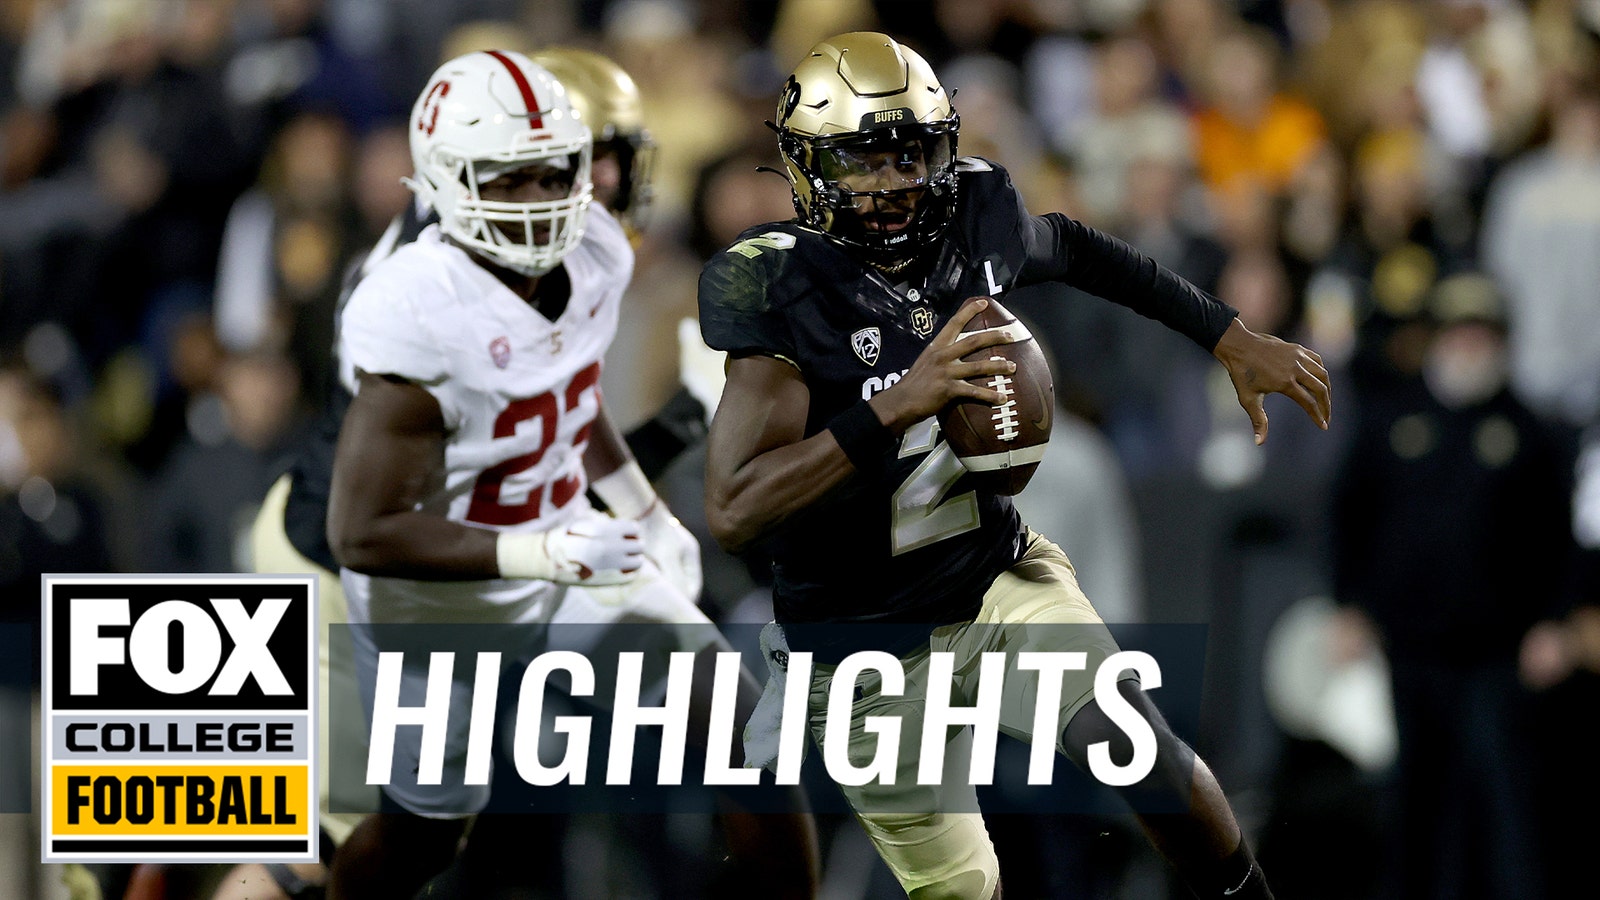 Stanford Cardinal pull off comeback win over Colorado Buffaloes